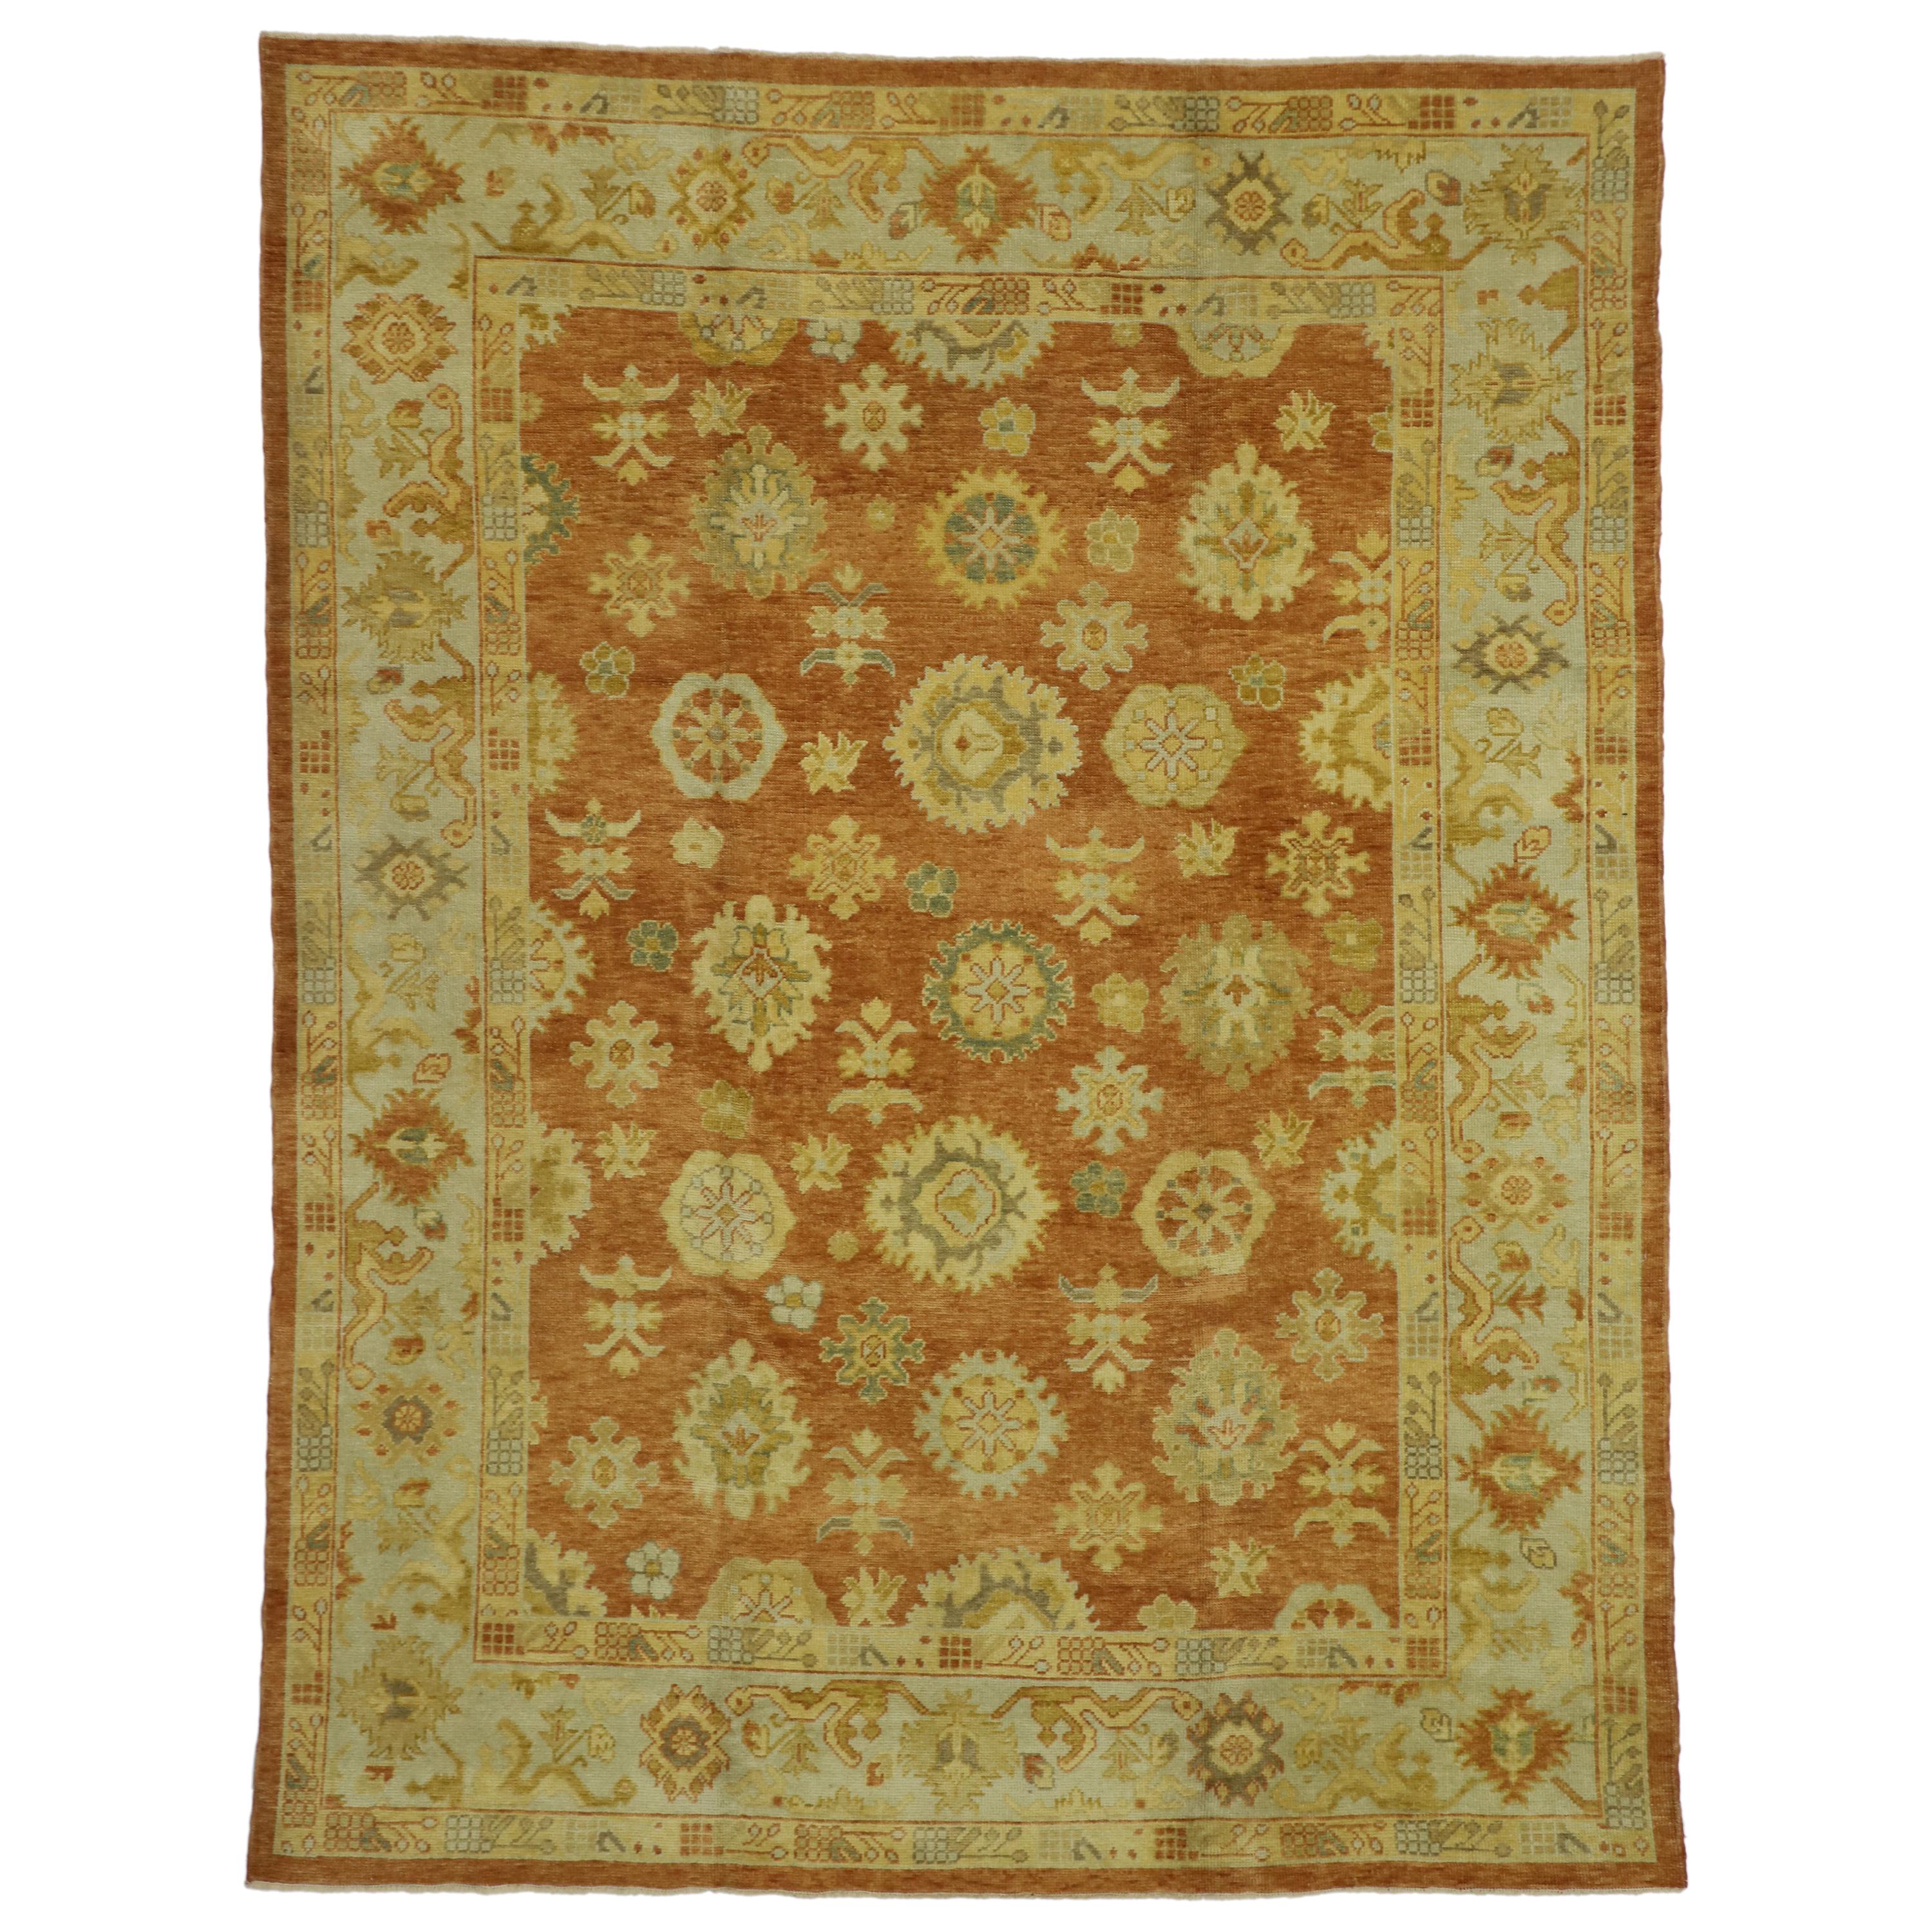 New Contemporary Turkish Oushak Rug with Rustic Tuscan Style